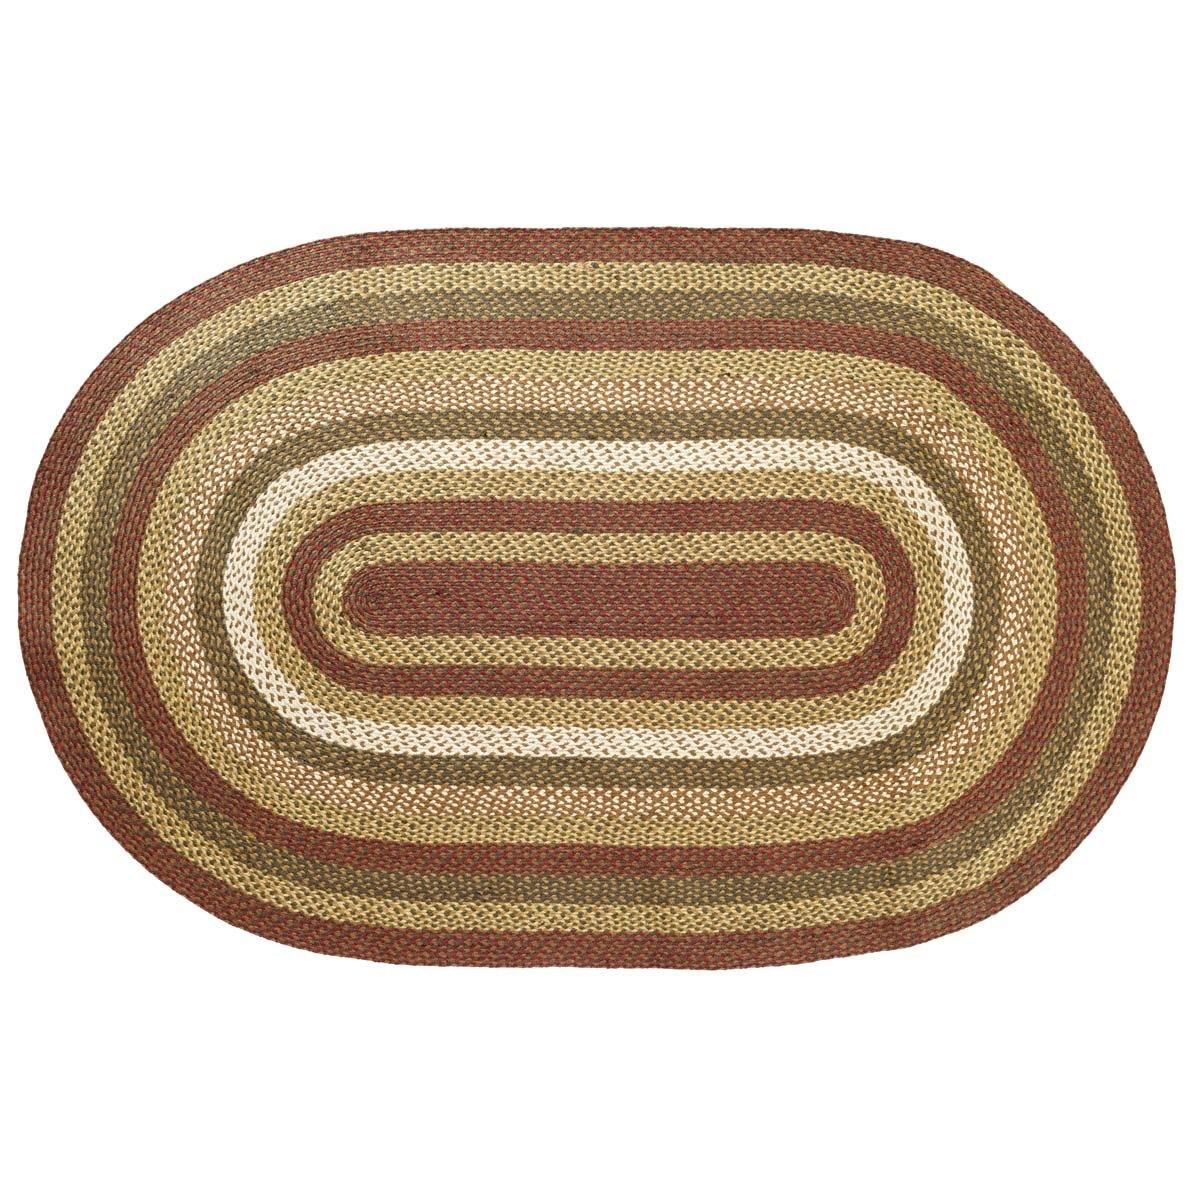 Tea Cabin Jute Braided Rug Oval 5'x8' with Rug Pad VHC Brands - The Fox Decor